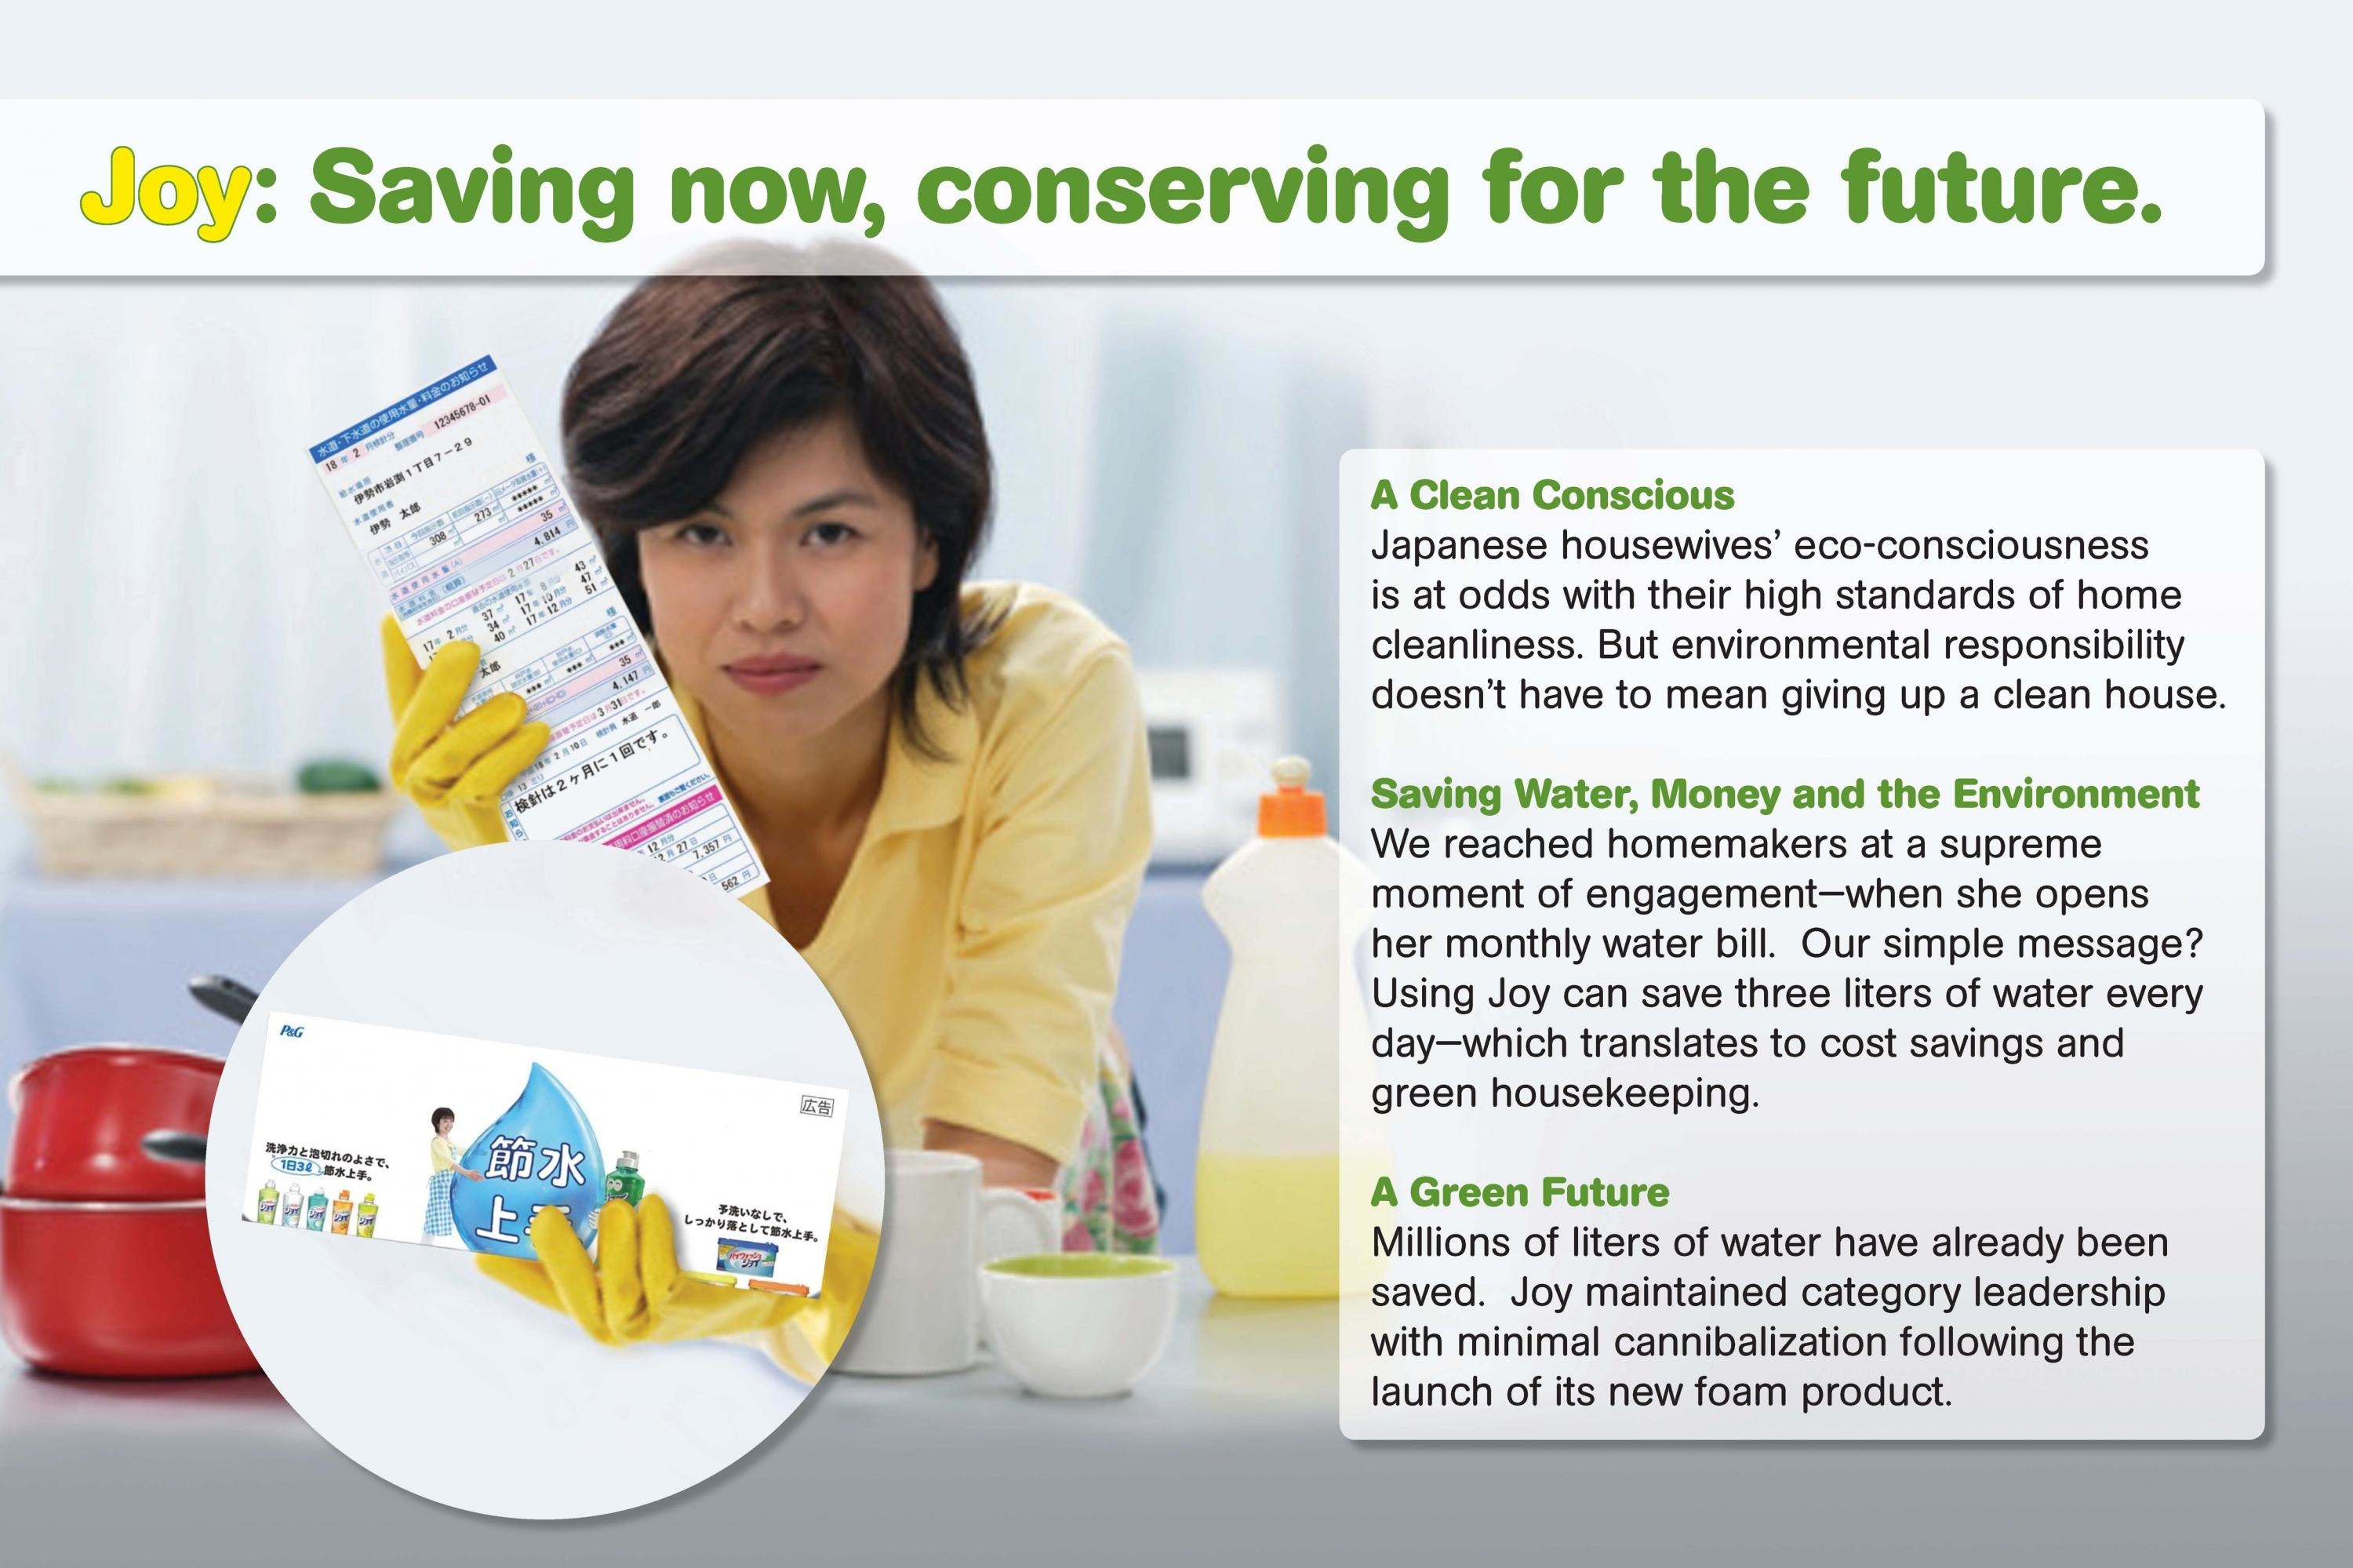 WATER CONSERVATION